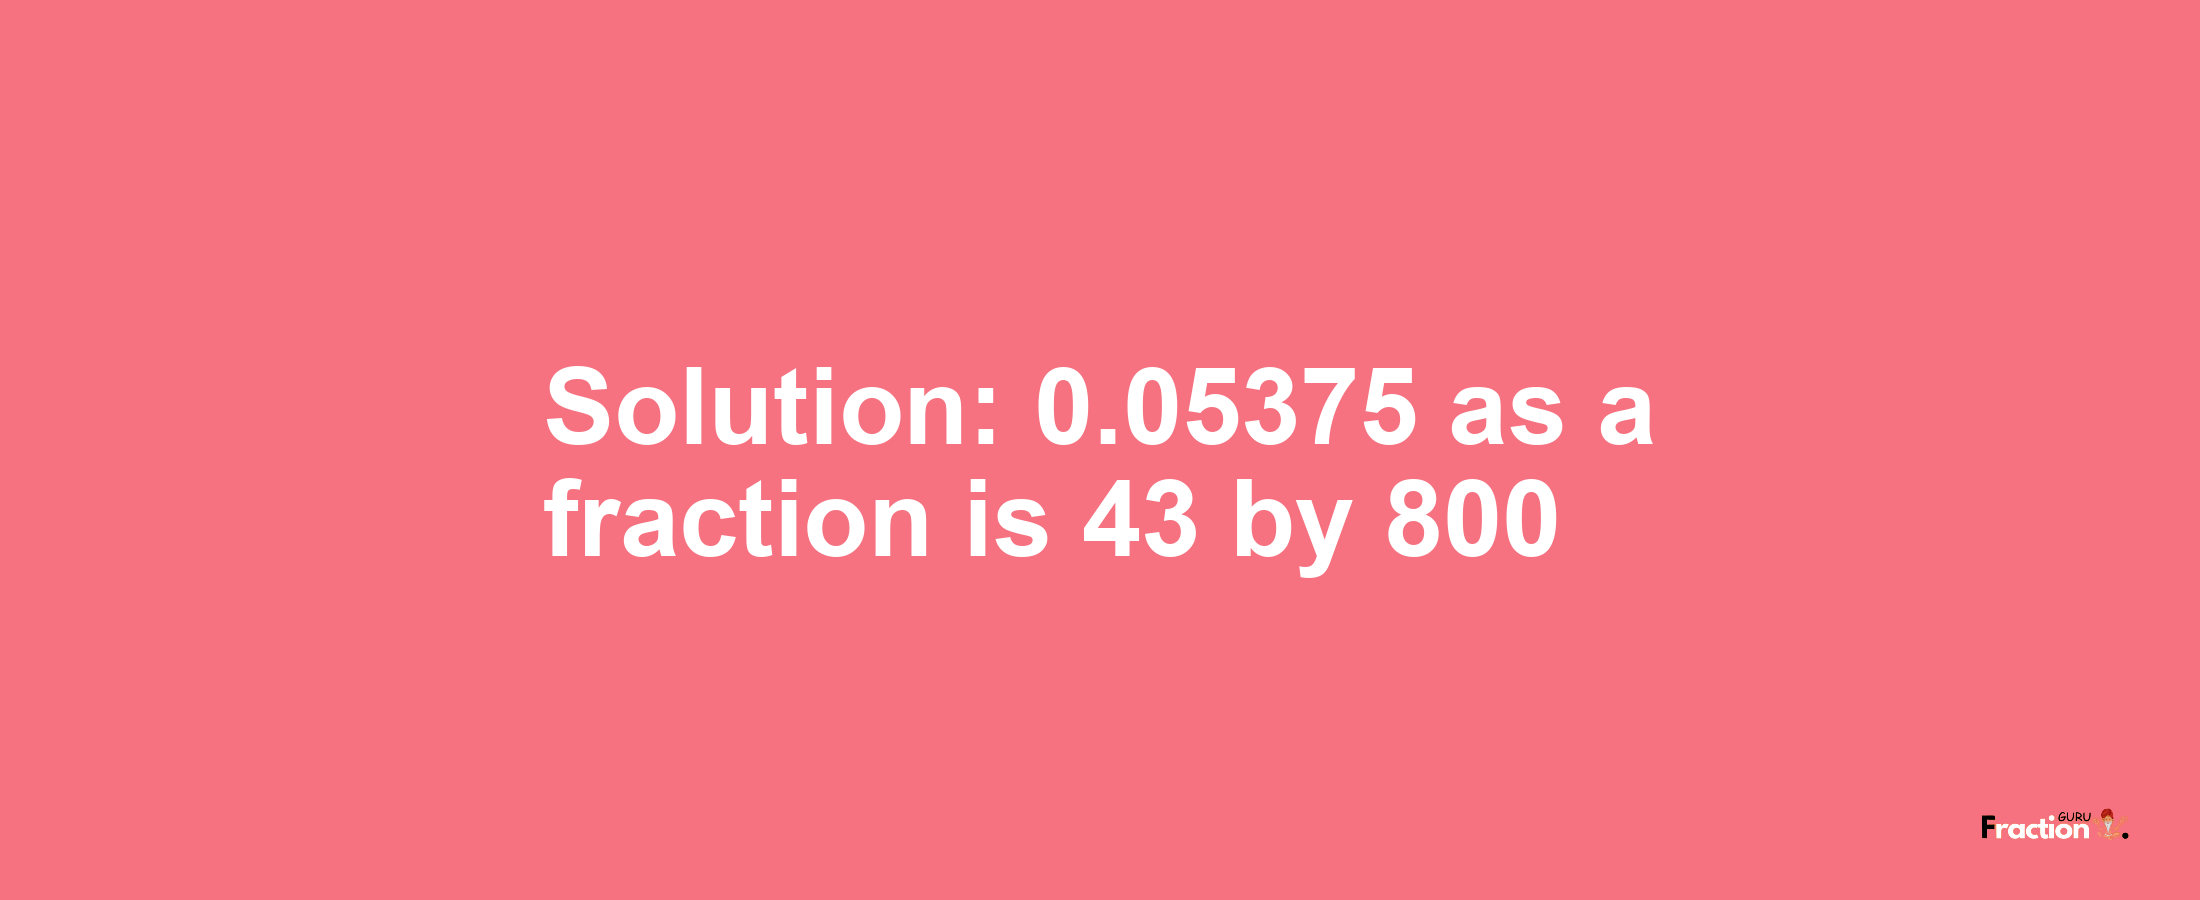 Solution:0.05375 as a fraction is 43/800